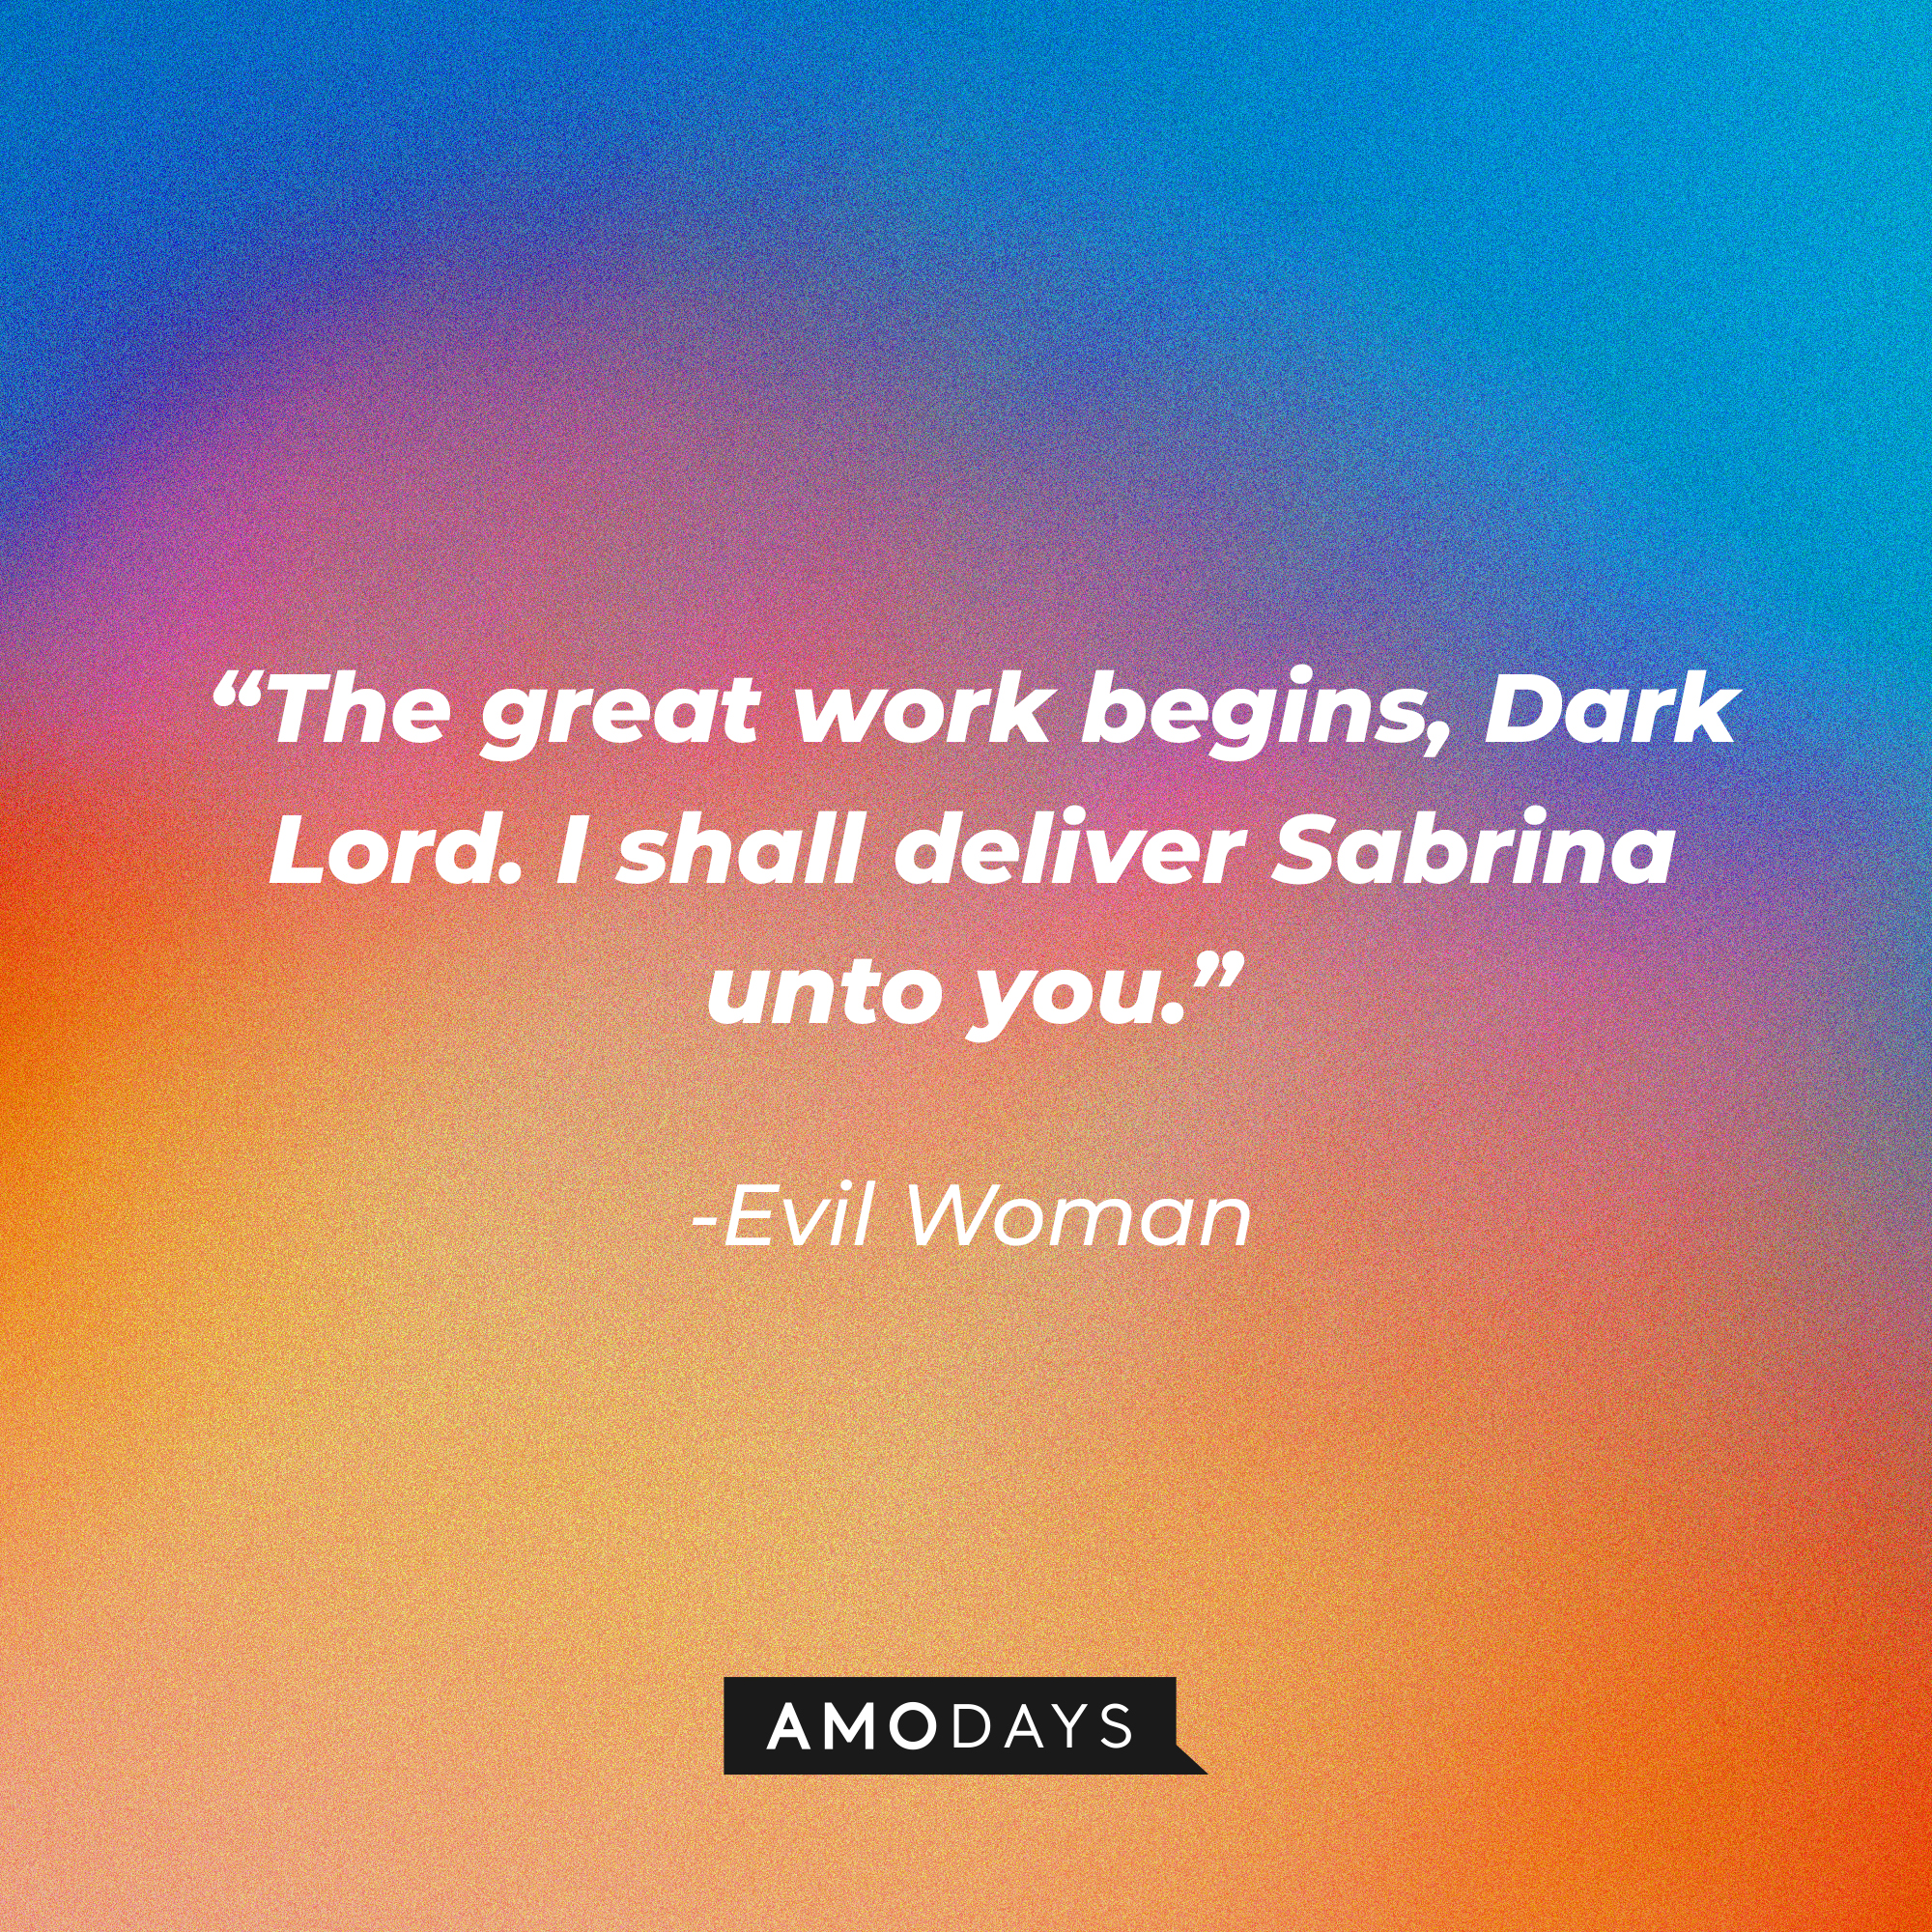 Evil Woman's quote: “The great work begins, Dark Lord. I shall deliver Sabrina unto you.” | Source: Amodays